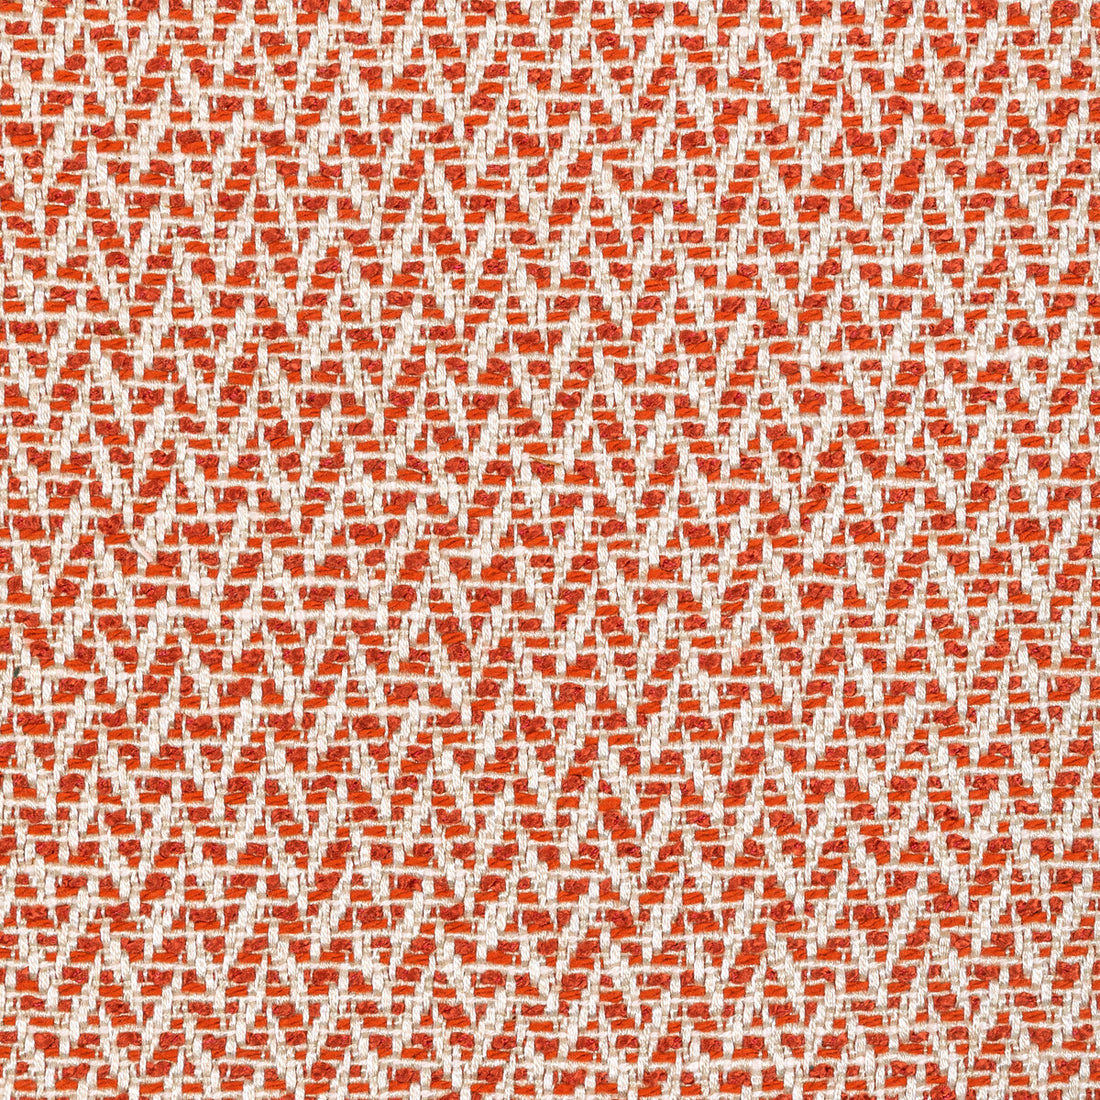 Kravet Design fabric in 36418-119 color - pattern 36418.119.0 - by Kravet Design in the Performance Crypton Home collection